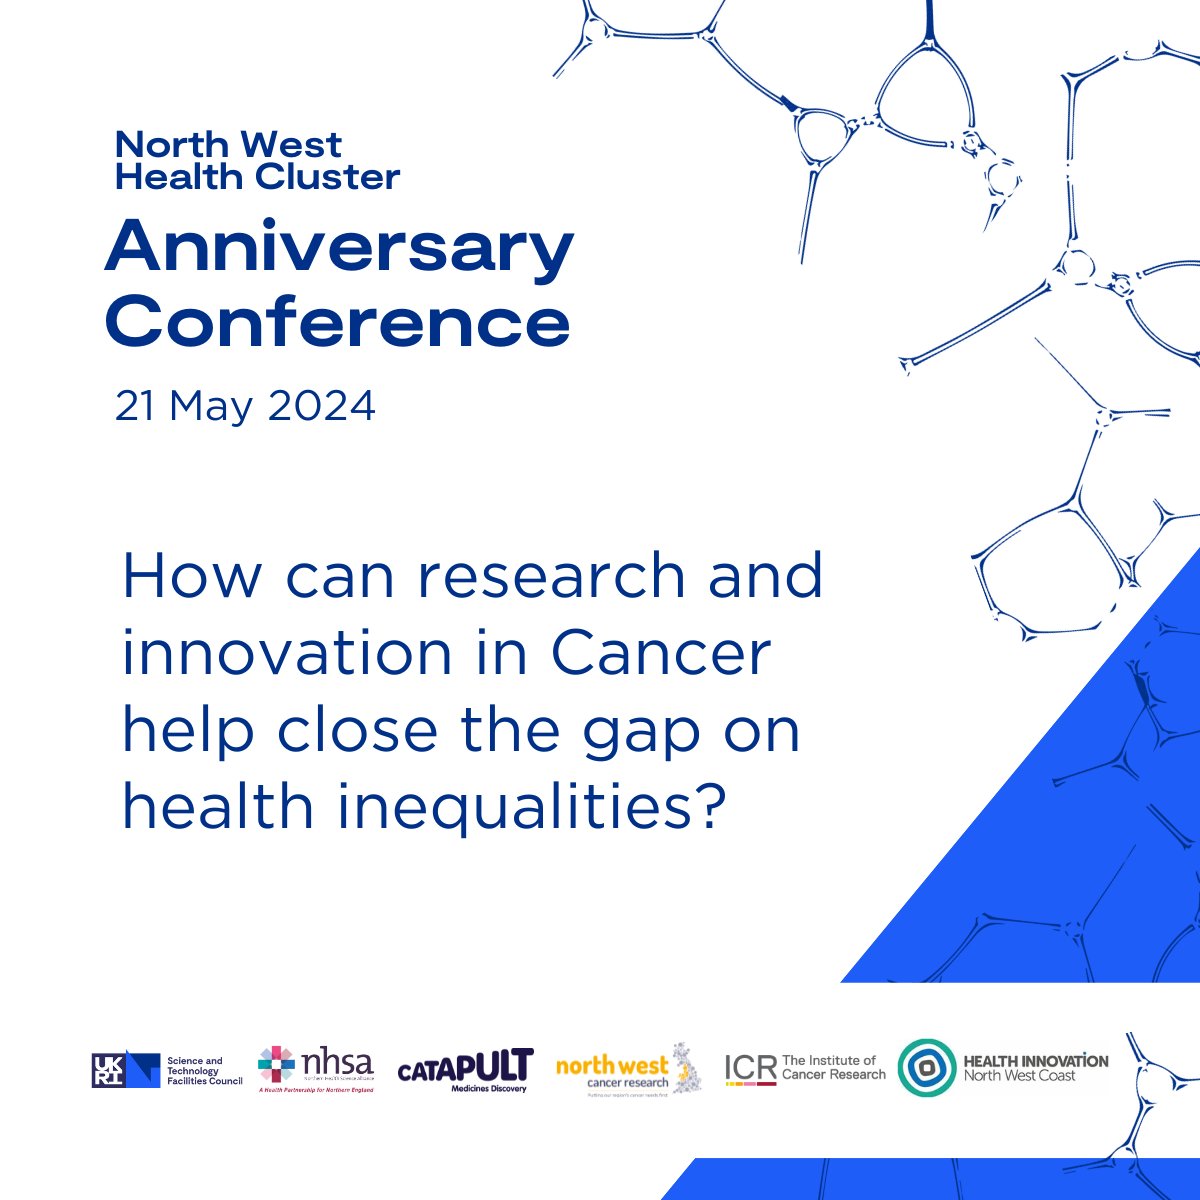 How can research and innovation in #cancer help close the gap on health inequalities? Hear about this and more at the North West Health Cluster Anniversary Conference. 📆 Tuesday 21 May ➡ Sign up via Eventbrite: eventbrite.co.uk/e/north-west-h… @PhilipCarvil #NWHealthCluster